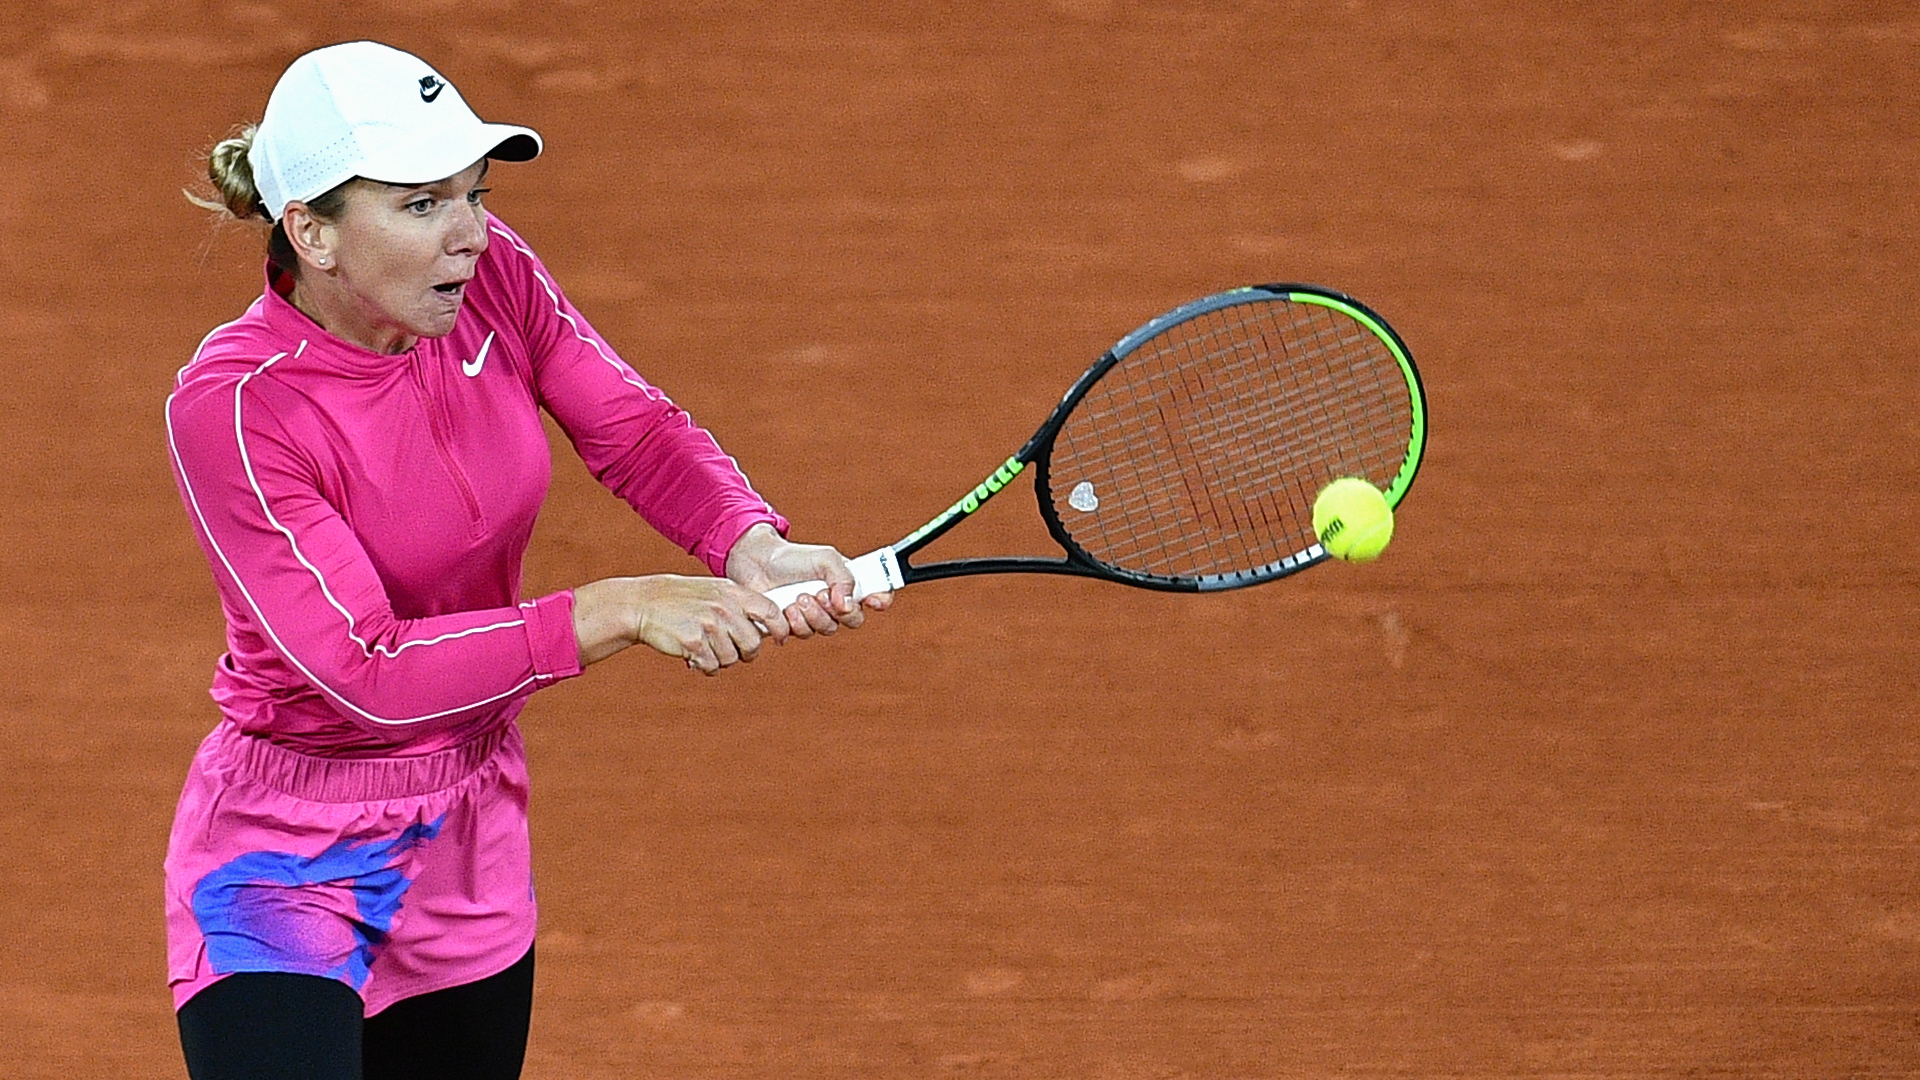 Simona Halep marked her 29th birthday with a first-round win at the French Open, where the top seed began slowly in chilly conditions.